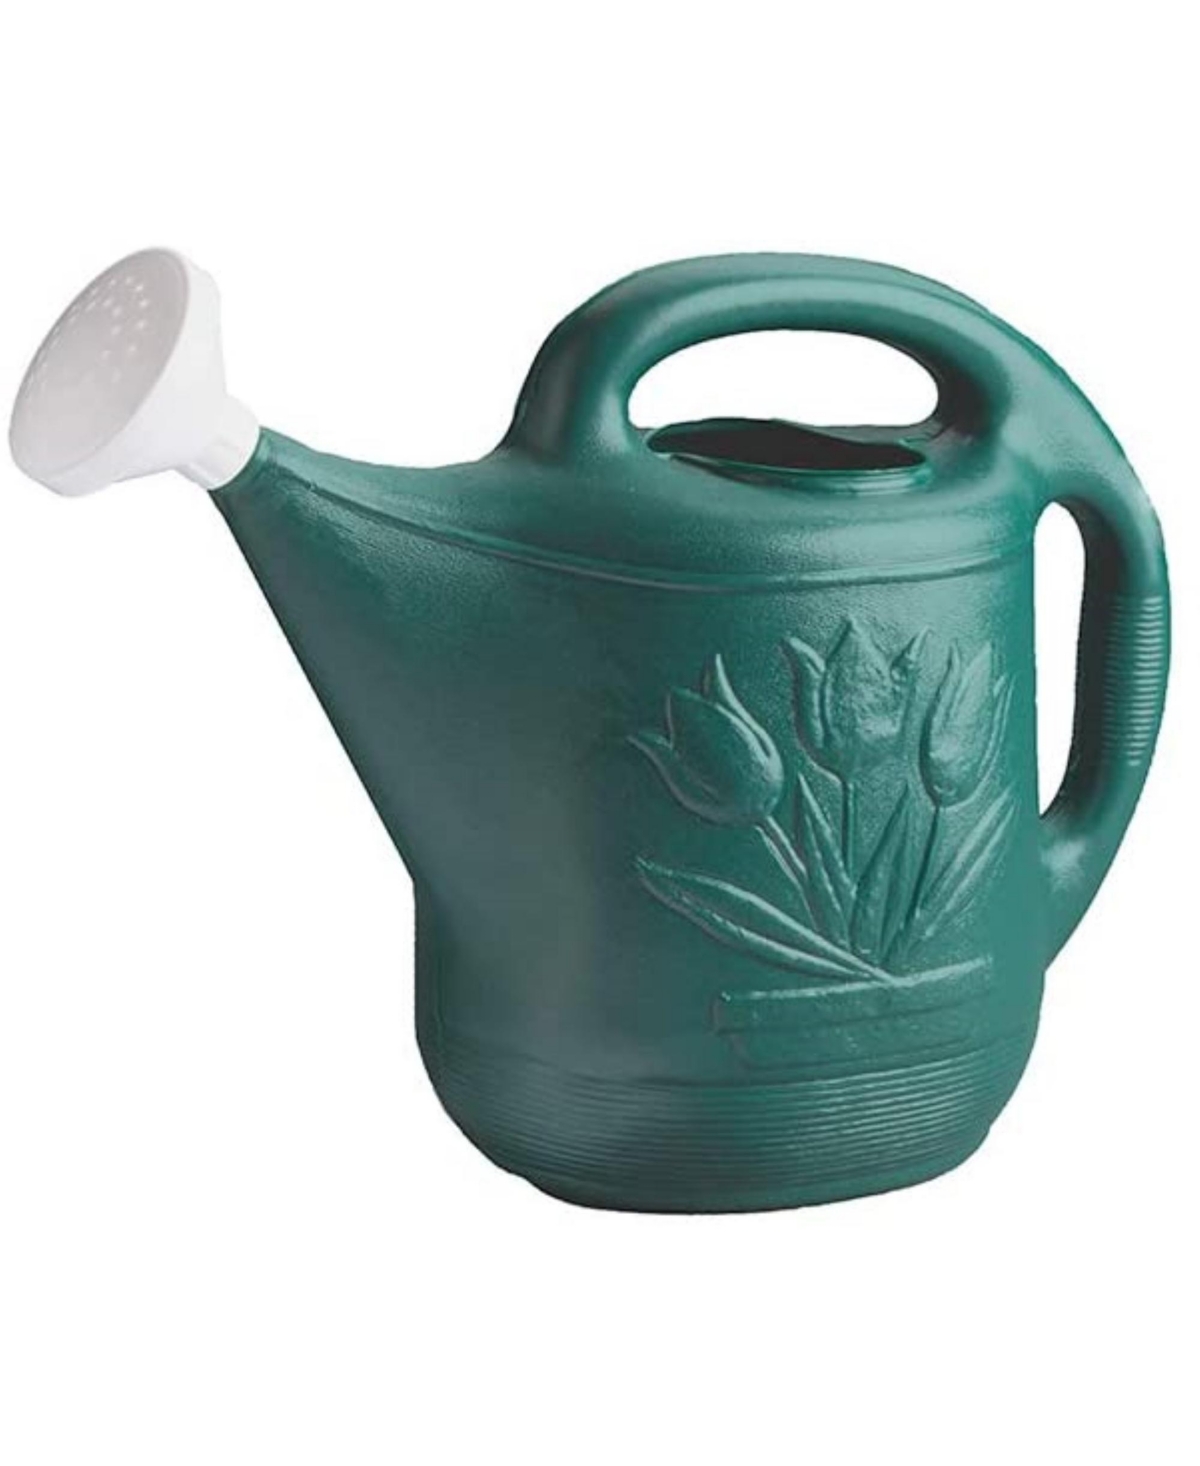 Classic Plastic Watering Can, Green, 2 Gallon Capacity - Green